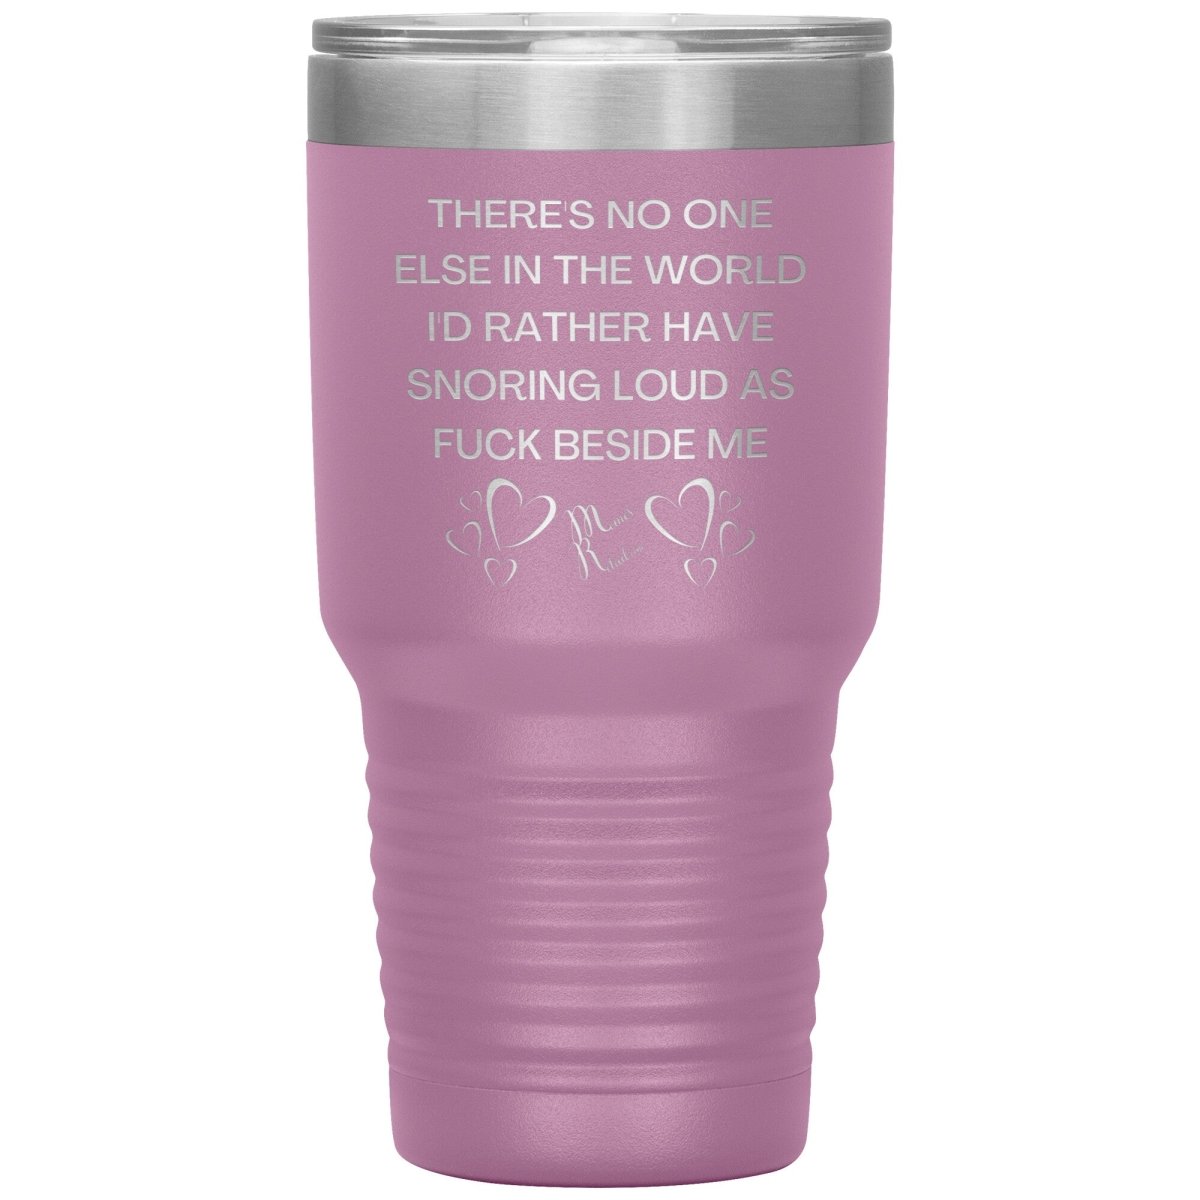 There's No One Else in the World I'd Rather Have Snoring Loud, 30oz Insulated Tumbler / Light Purple - MemesRetail.com